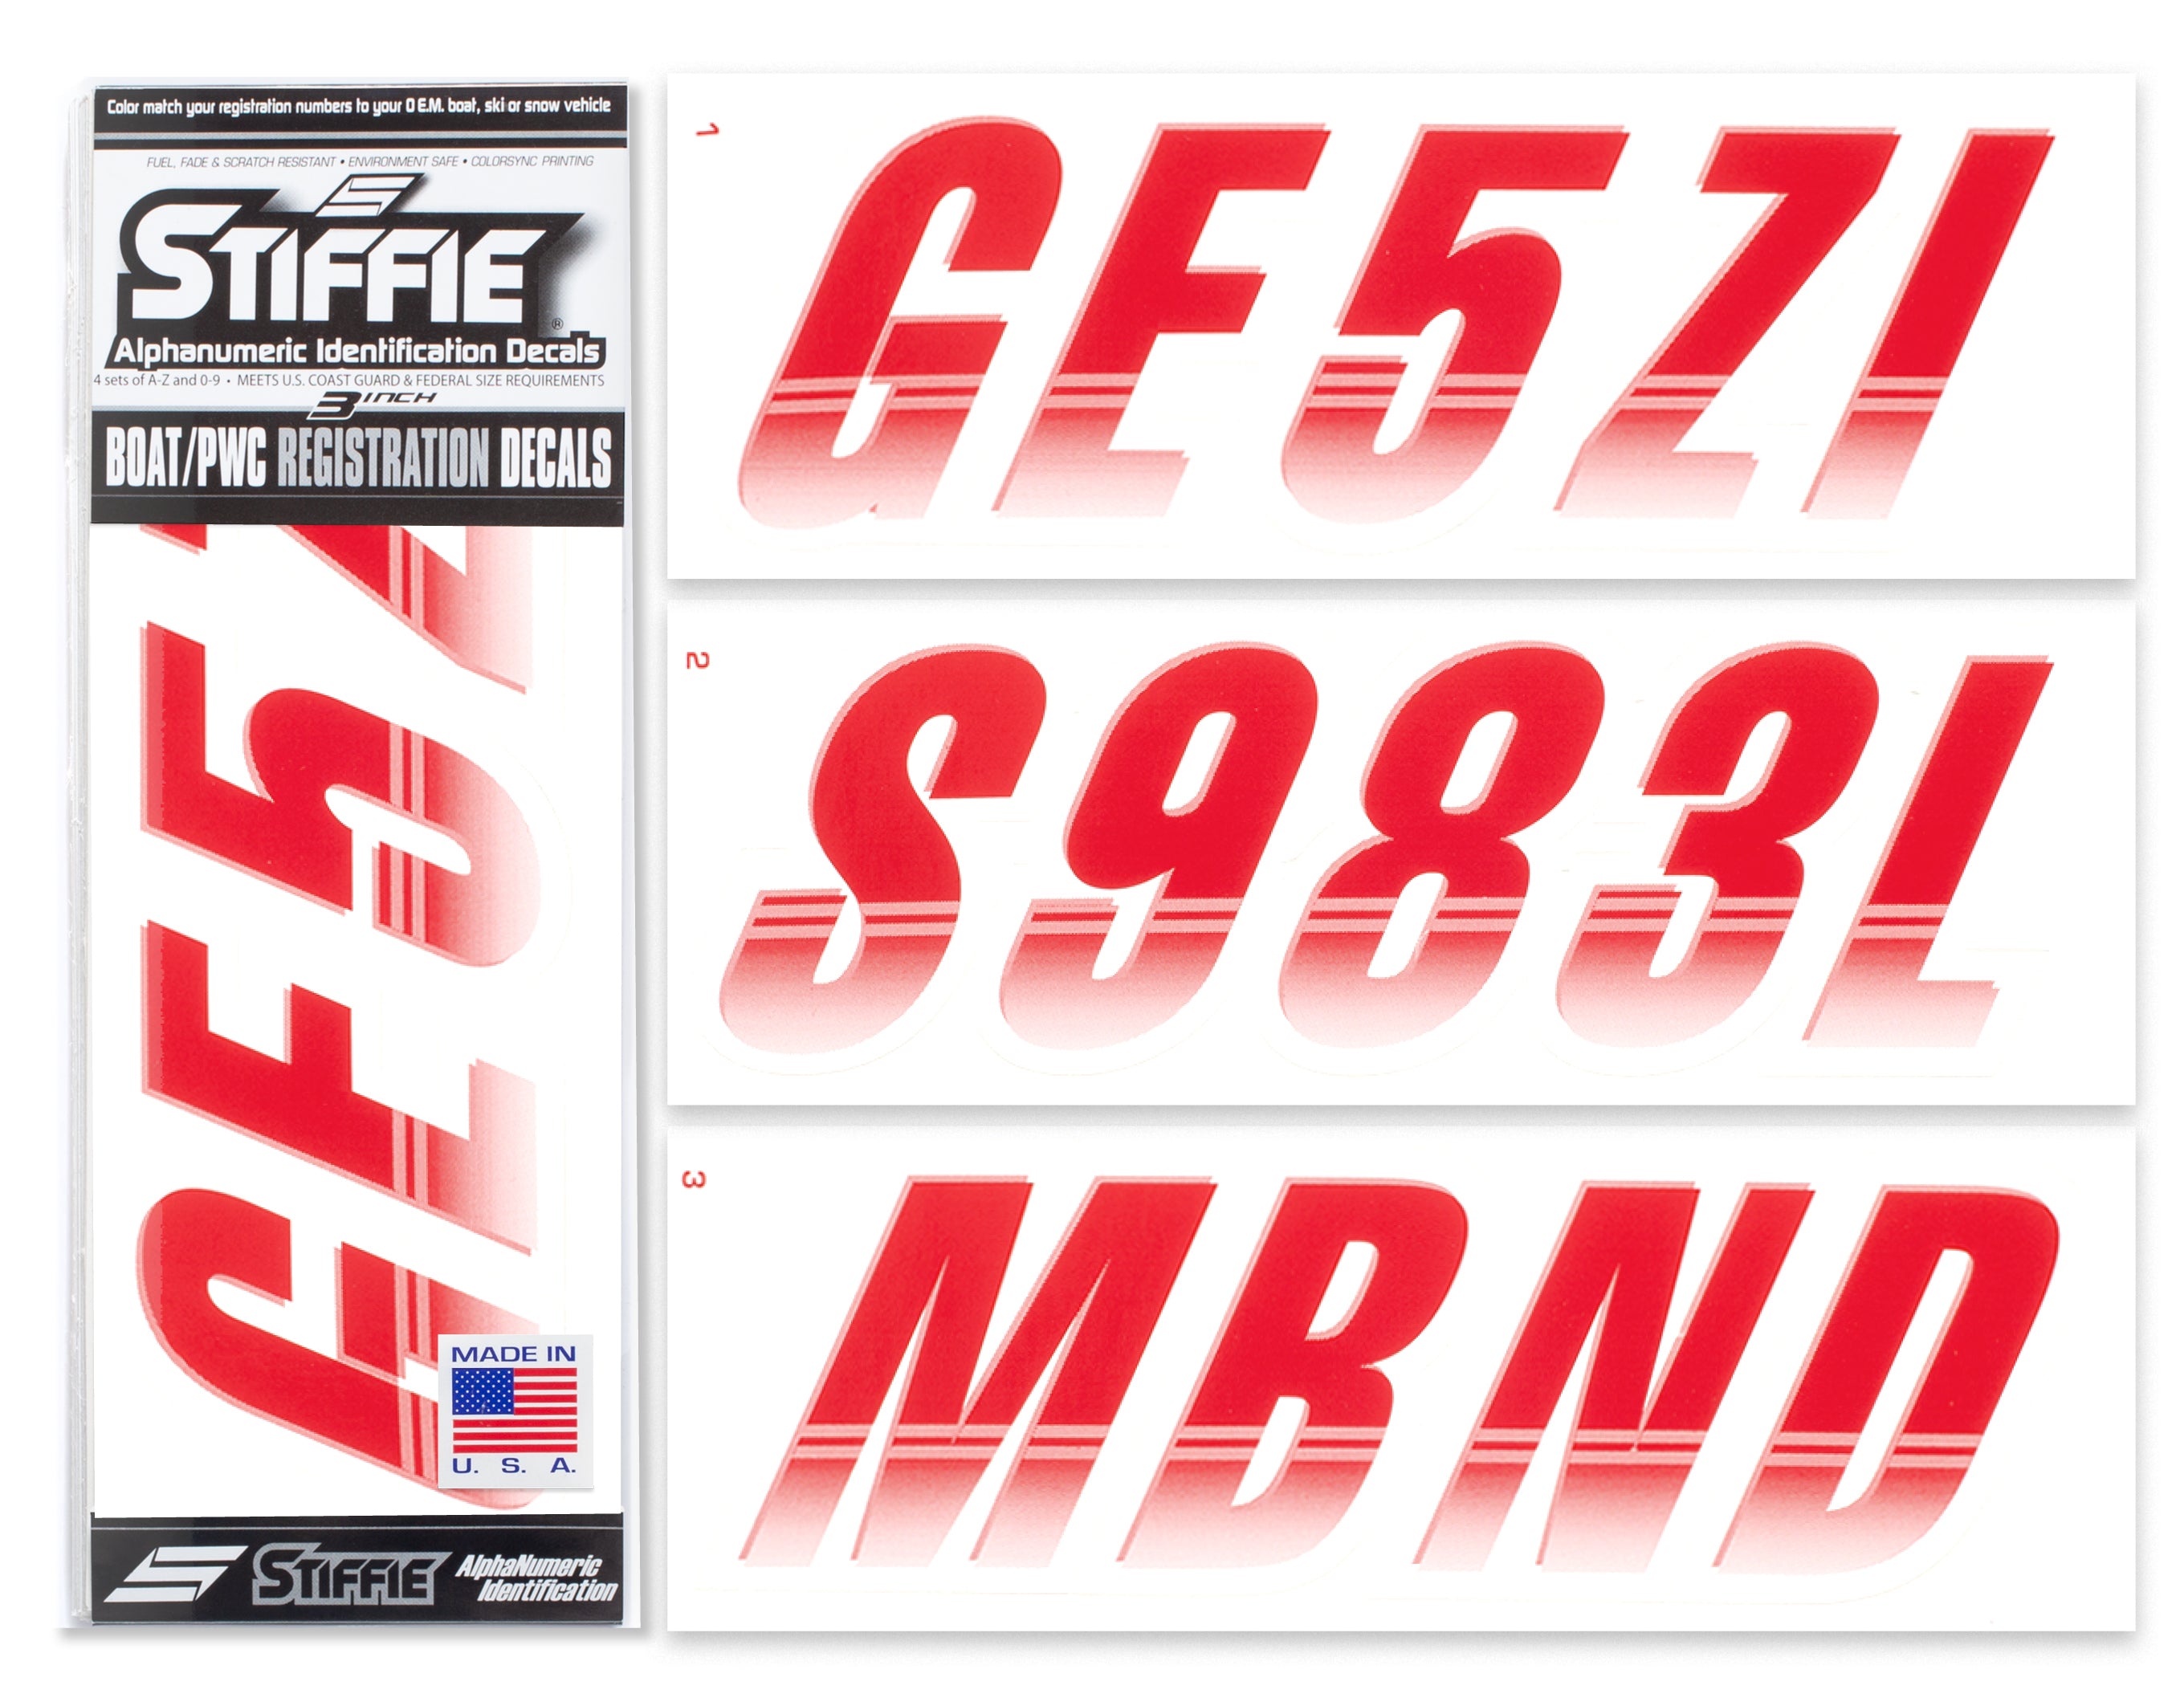 Stiffie Techtron Red/White 3" Alpha-Numeric Registration Identification Numbers Stickers Decals for Boats & Personal Watercraft